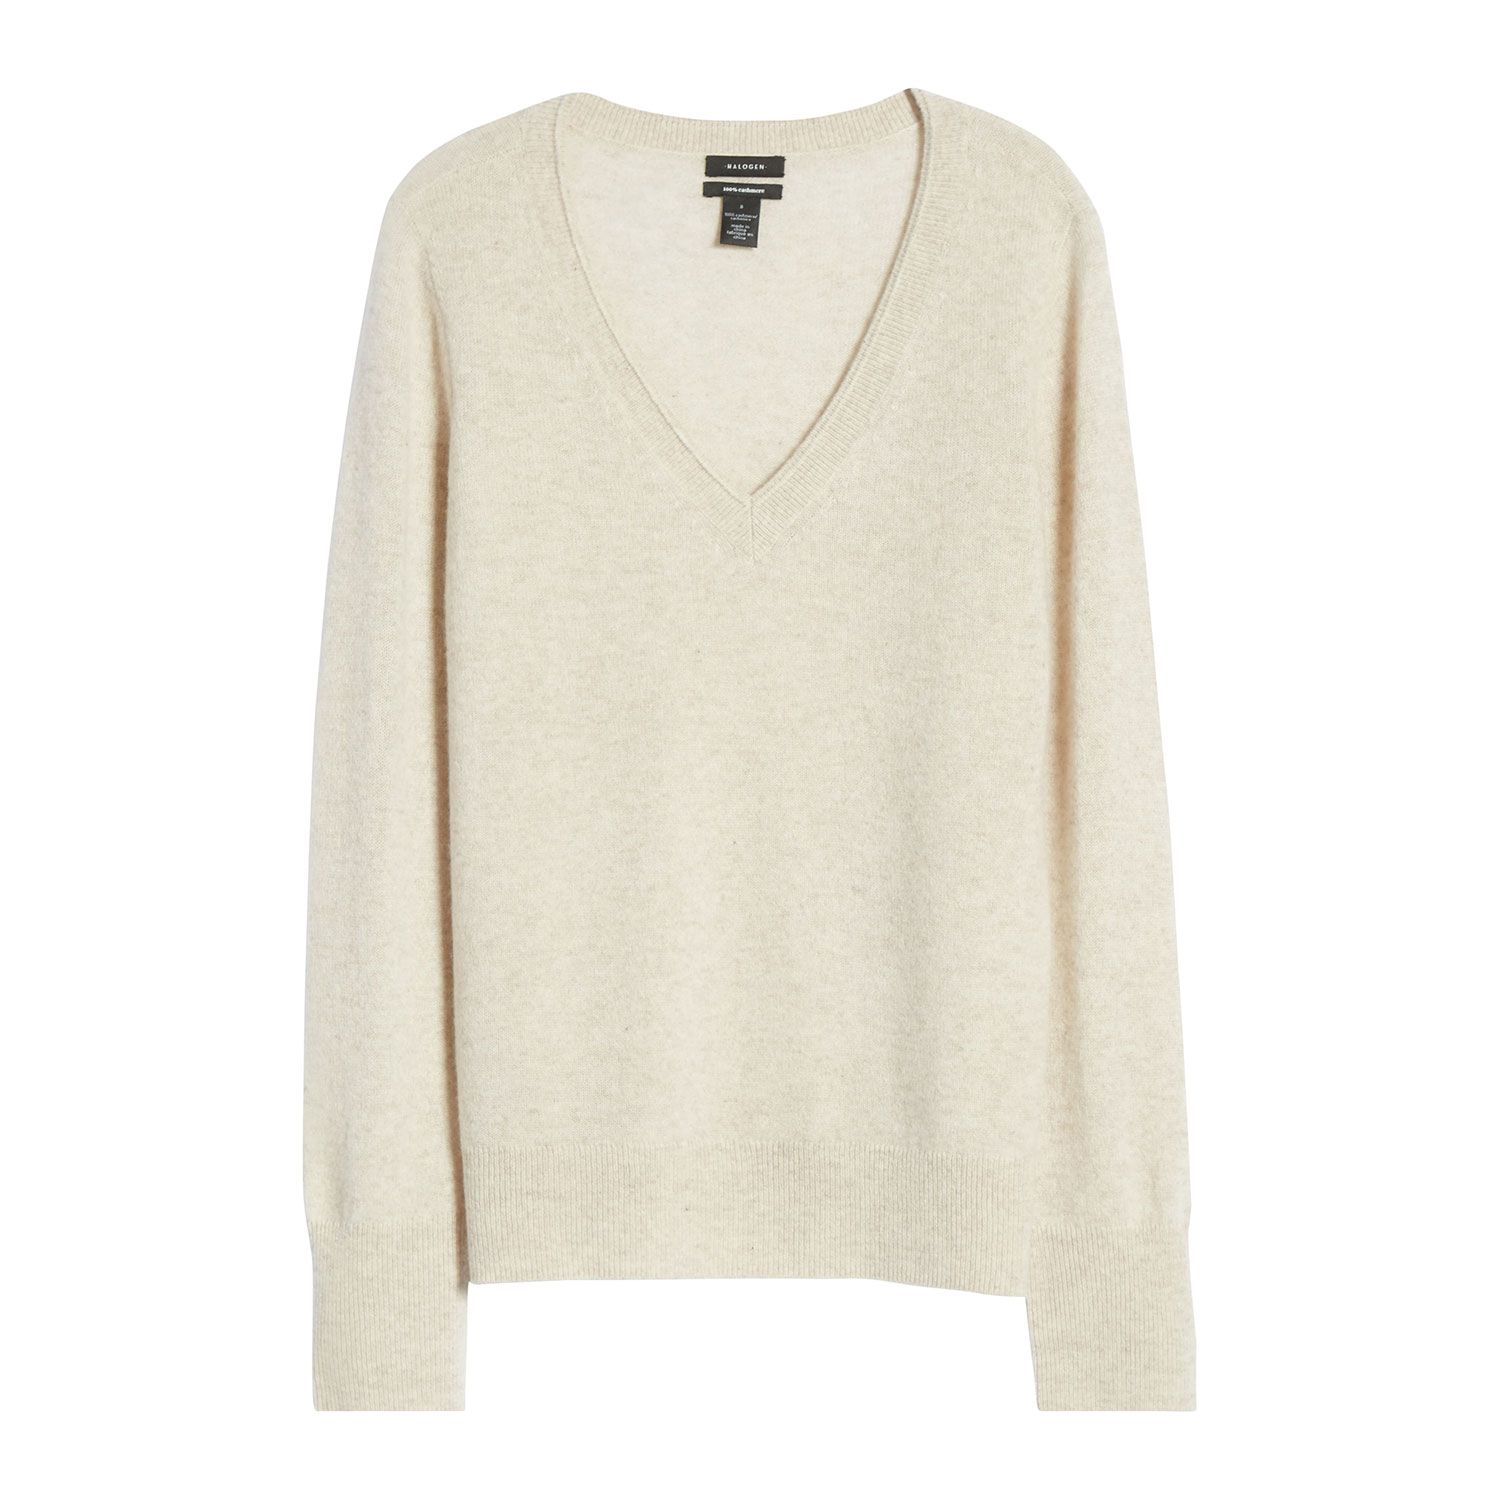 8 Best Places to Shop for Affordable, Quality Cashmere Sweaters ...